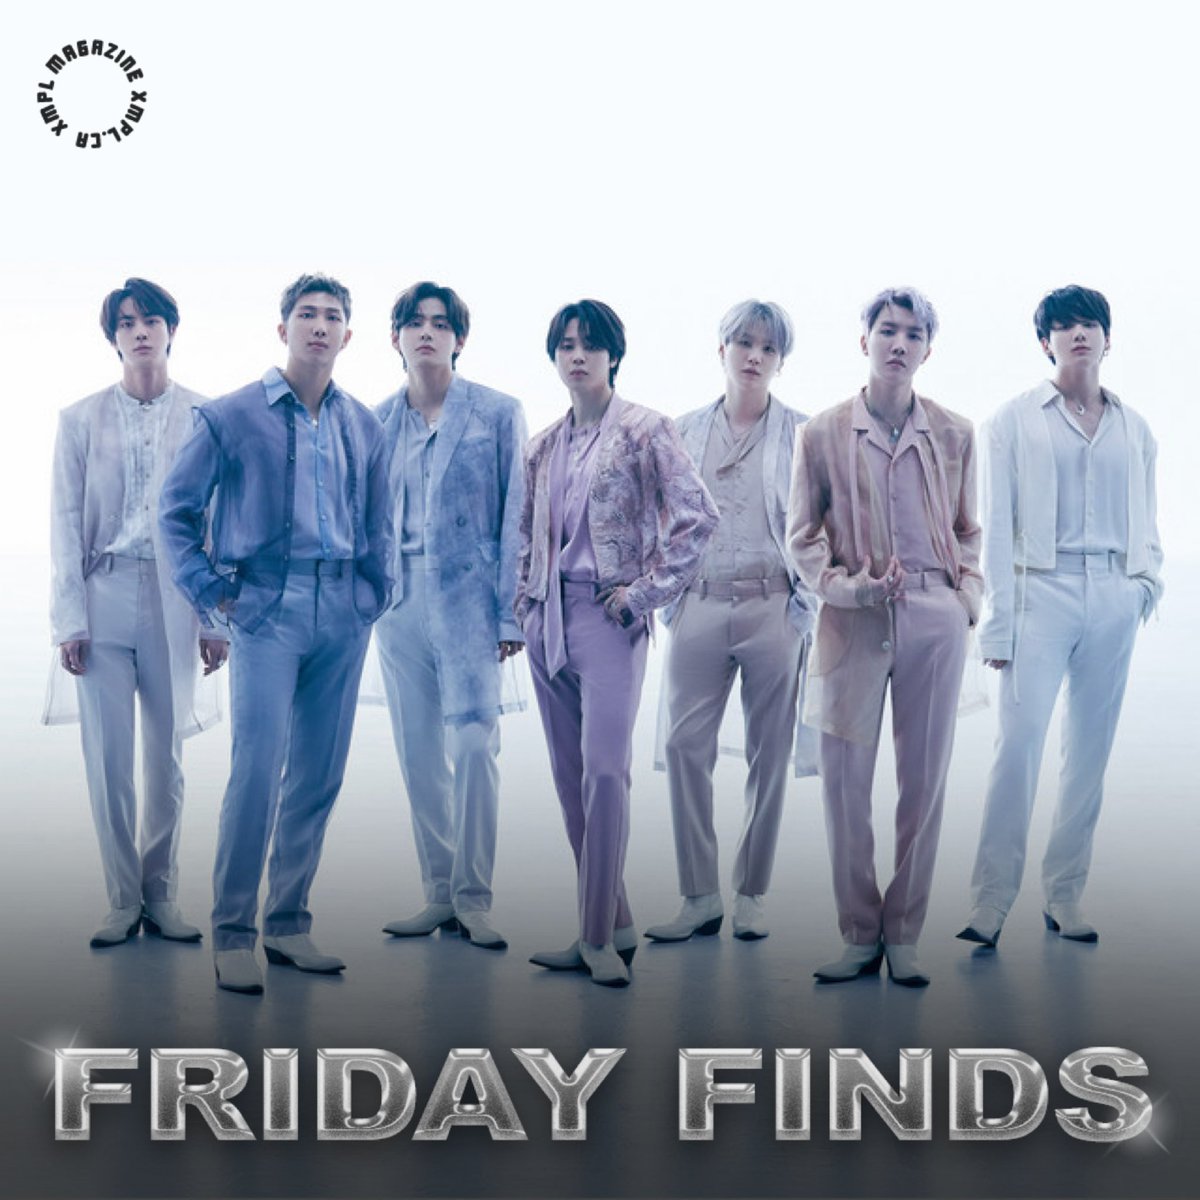 BTS (@BTS_twt) on the cover of our #FridayFinds Spotify playlist for their new song “The Planet” ❤️‍🔥💿 Listen now: spoti.fi/3ZvP7Z1